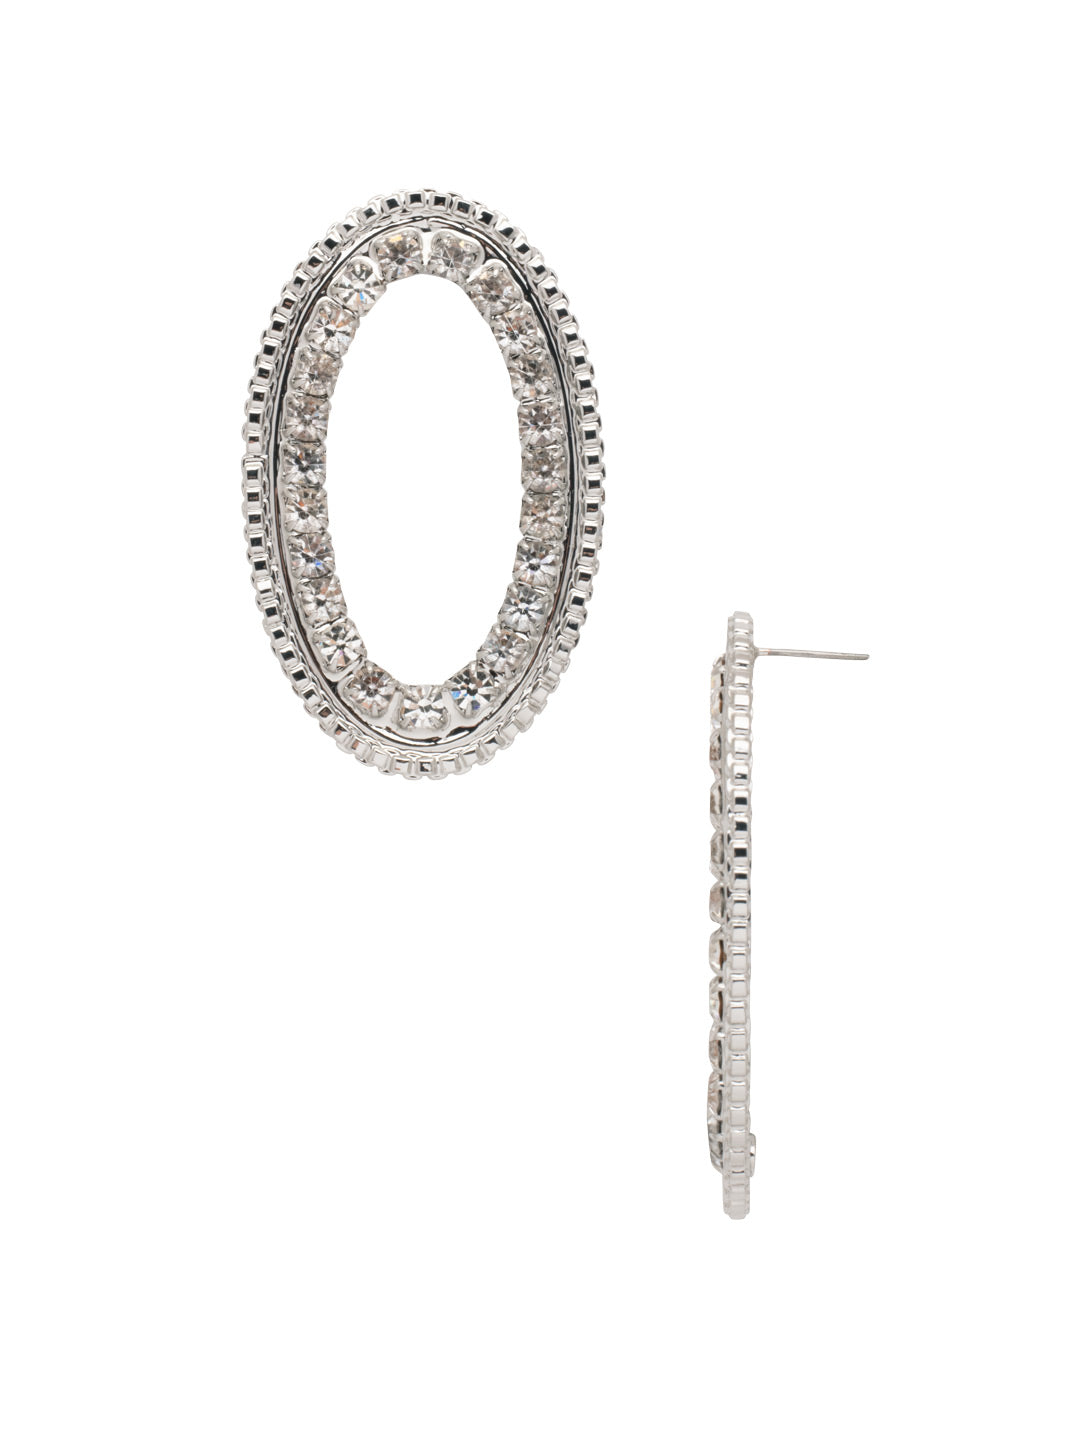 Sierra Statement Earring - EFC46PDSNB - <p>The Sierra Statement Earrings feature a dramatic oval hoop style with studded crystals. From Sorrelli's Snow Bunny collection in our Palladium finish.</p>